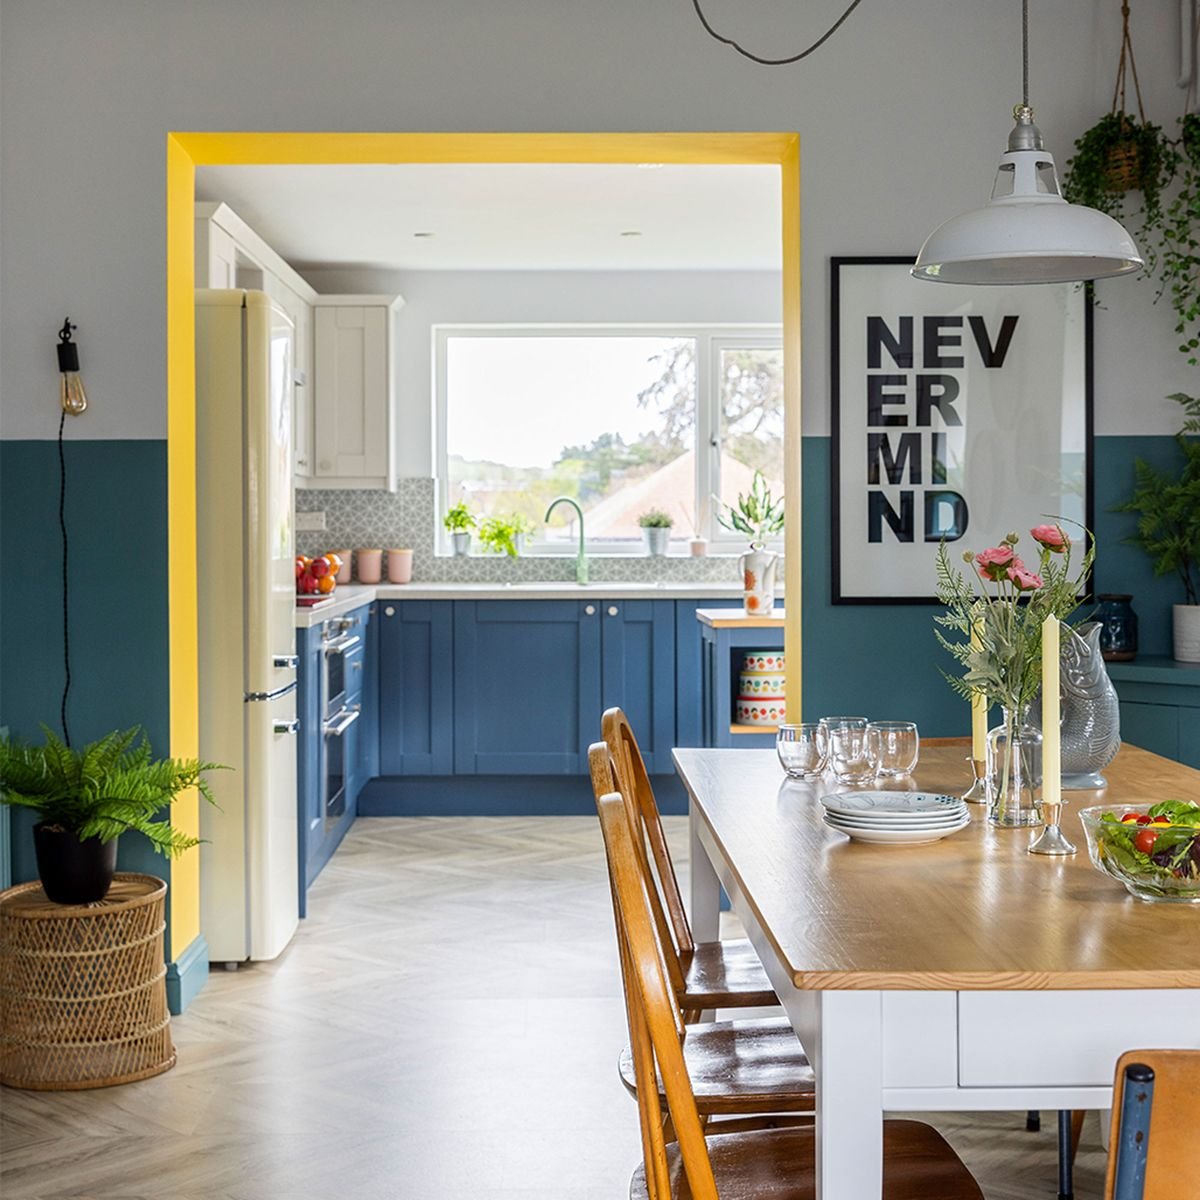 This family home has been given a coastal vibe with bright and breezy colours